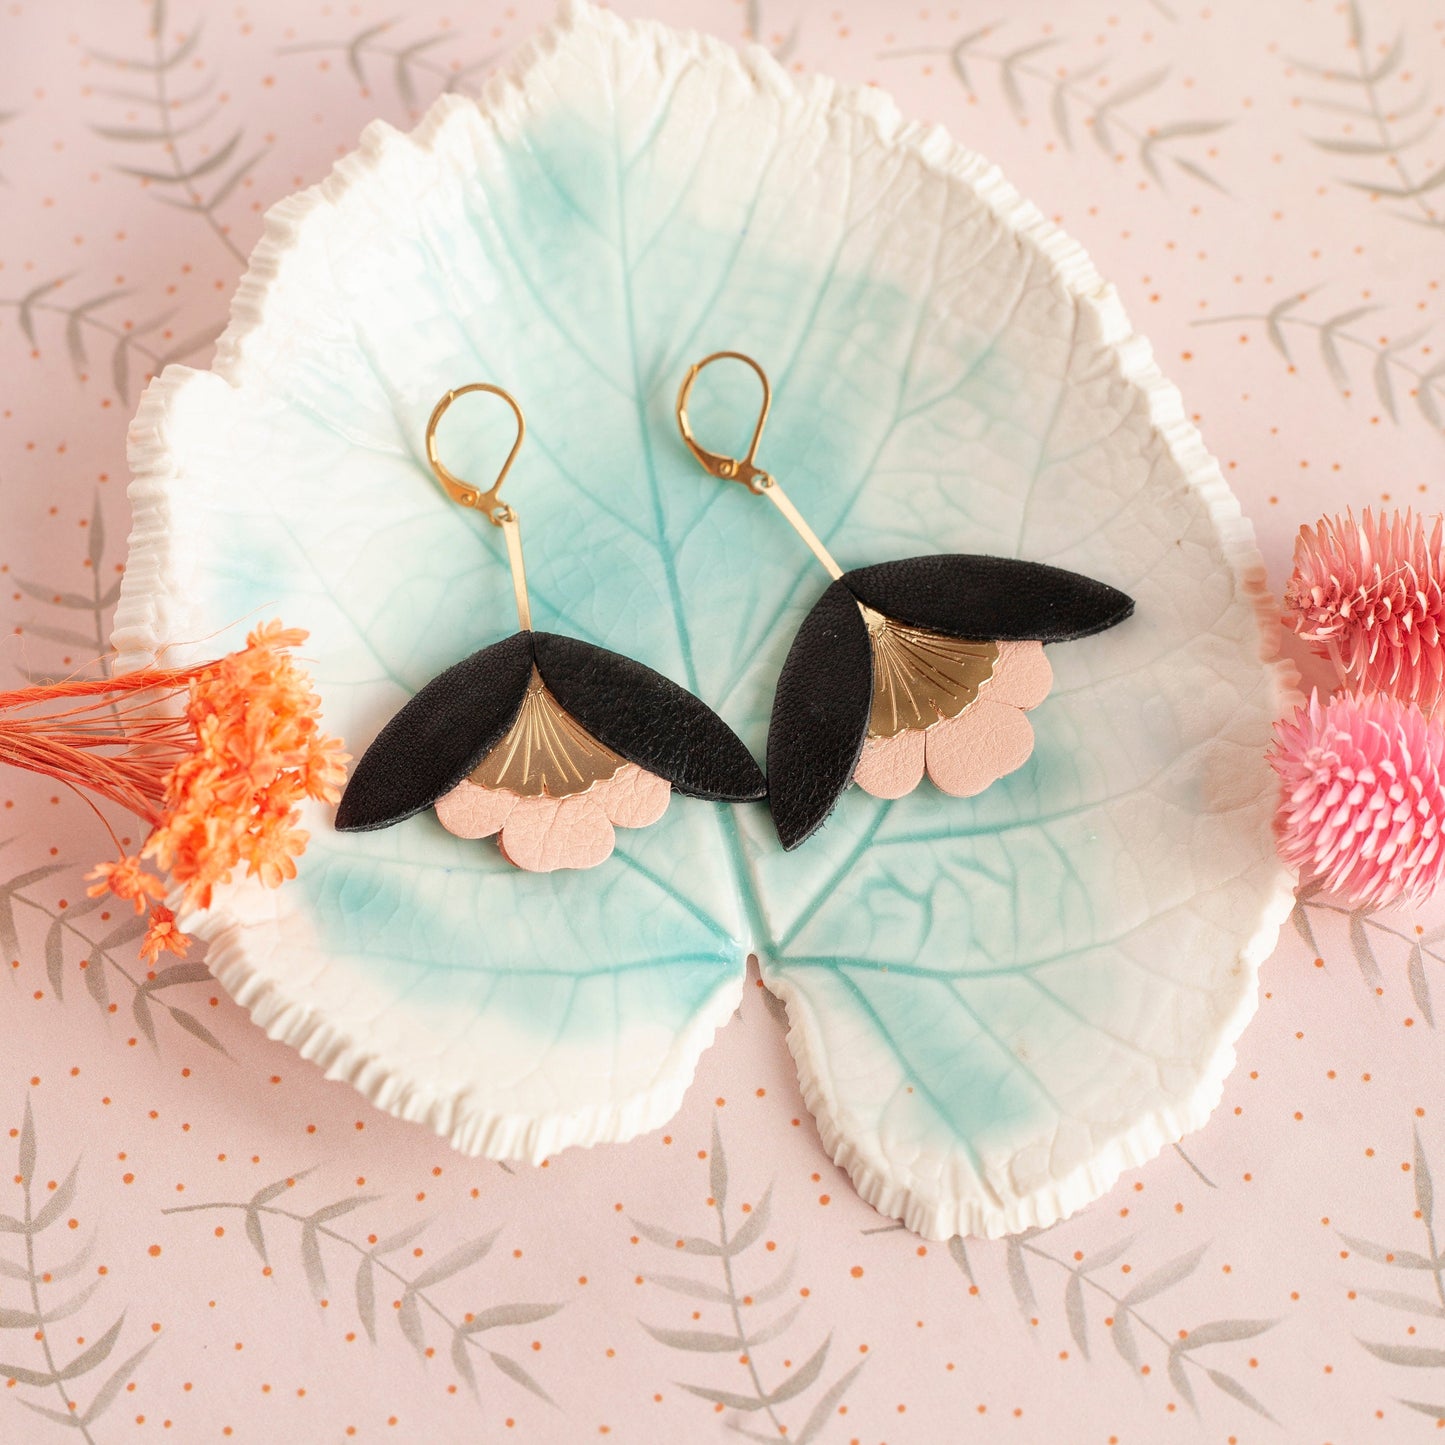 Ginkgo Flower earrings in black leather and flesh pink